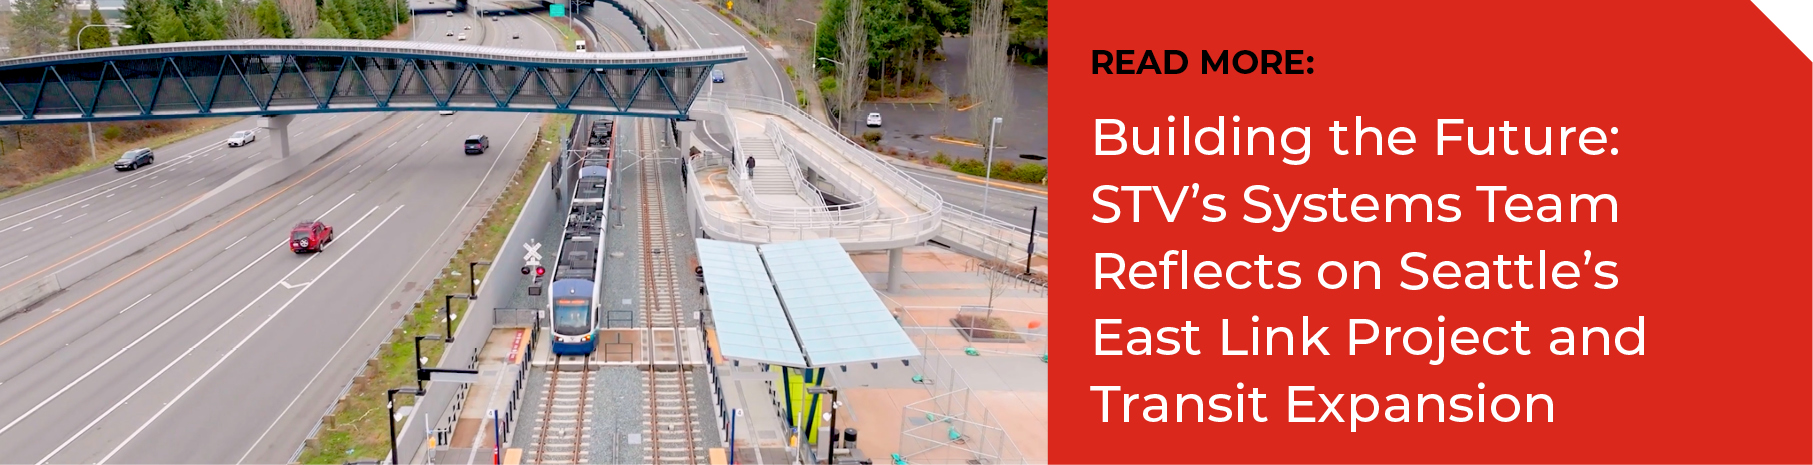 Read More: Building the Future: STV’s Systems Team Reflects on Seattle’s East Link Project and Transit Expansion